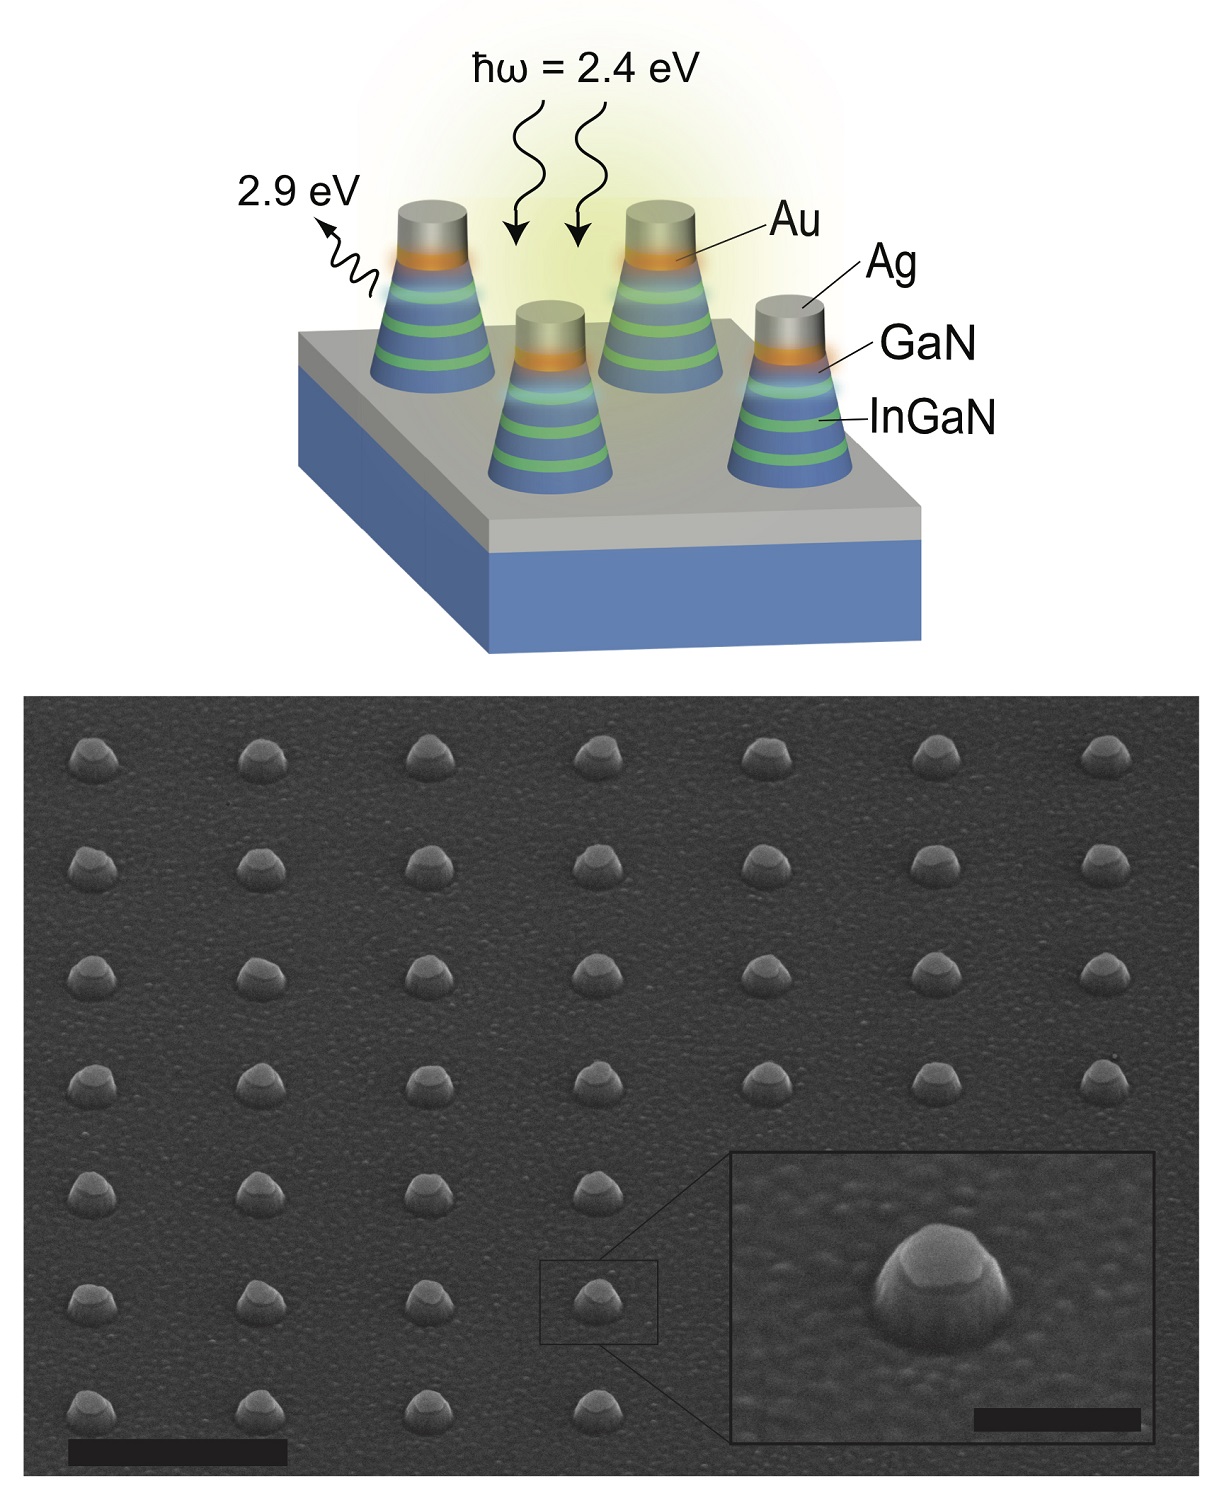 A Rice professor has introduced a new method that takes advantage of plasmonic metals’ production of hot carriers to boost light to a higher frequency